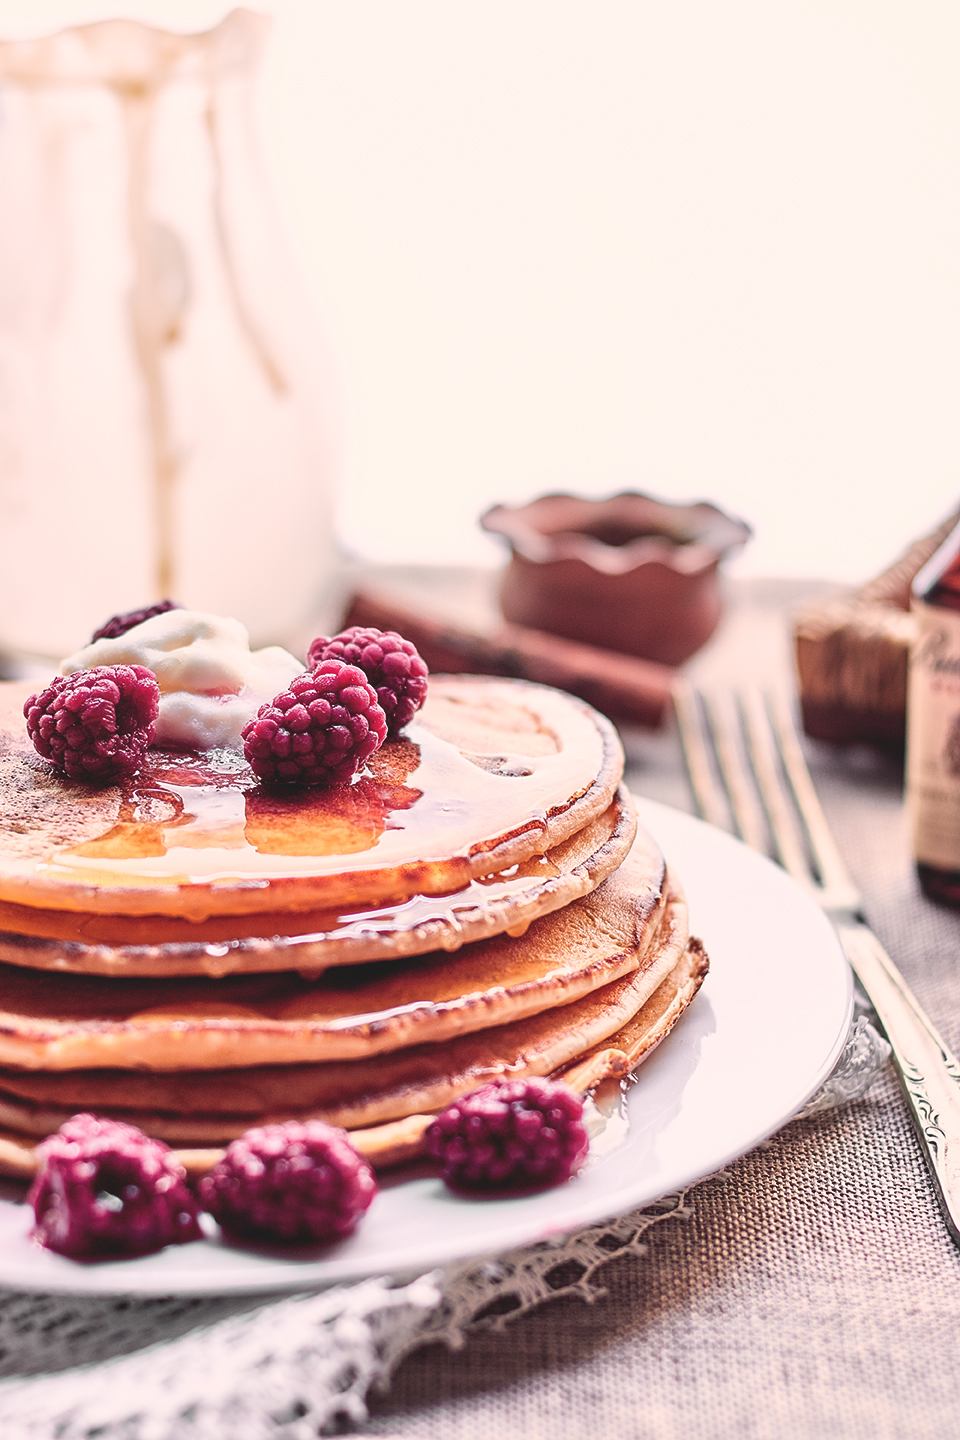 recipe recipes Photography  Food  pancakes cinemagraph catalina begni cooking sugary strangers honey